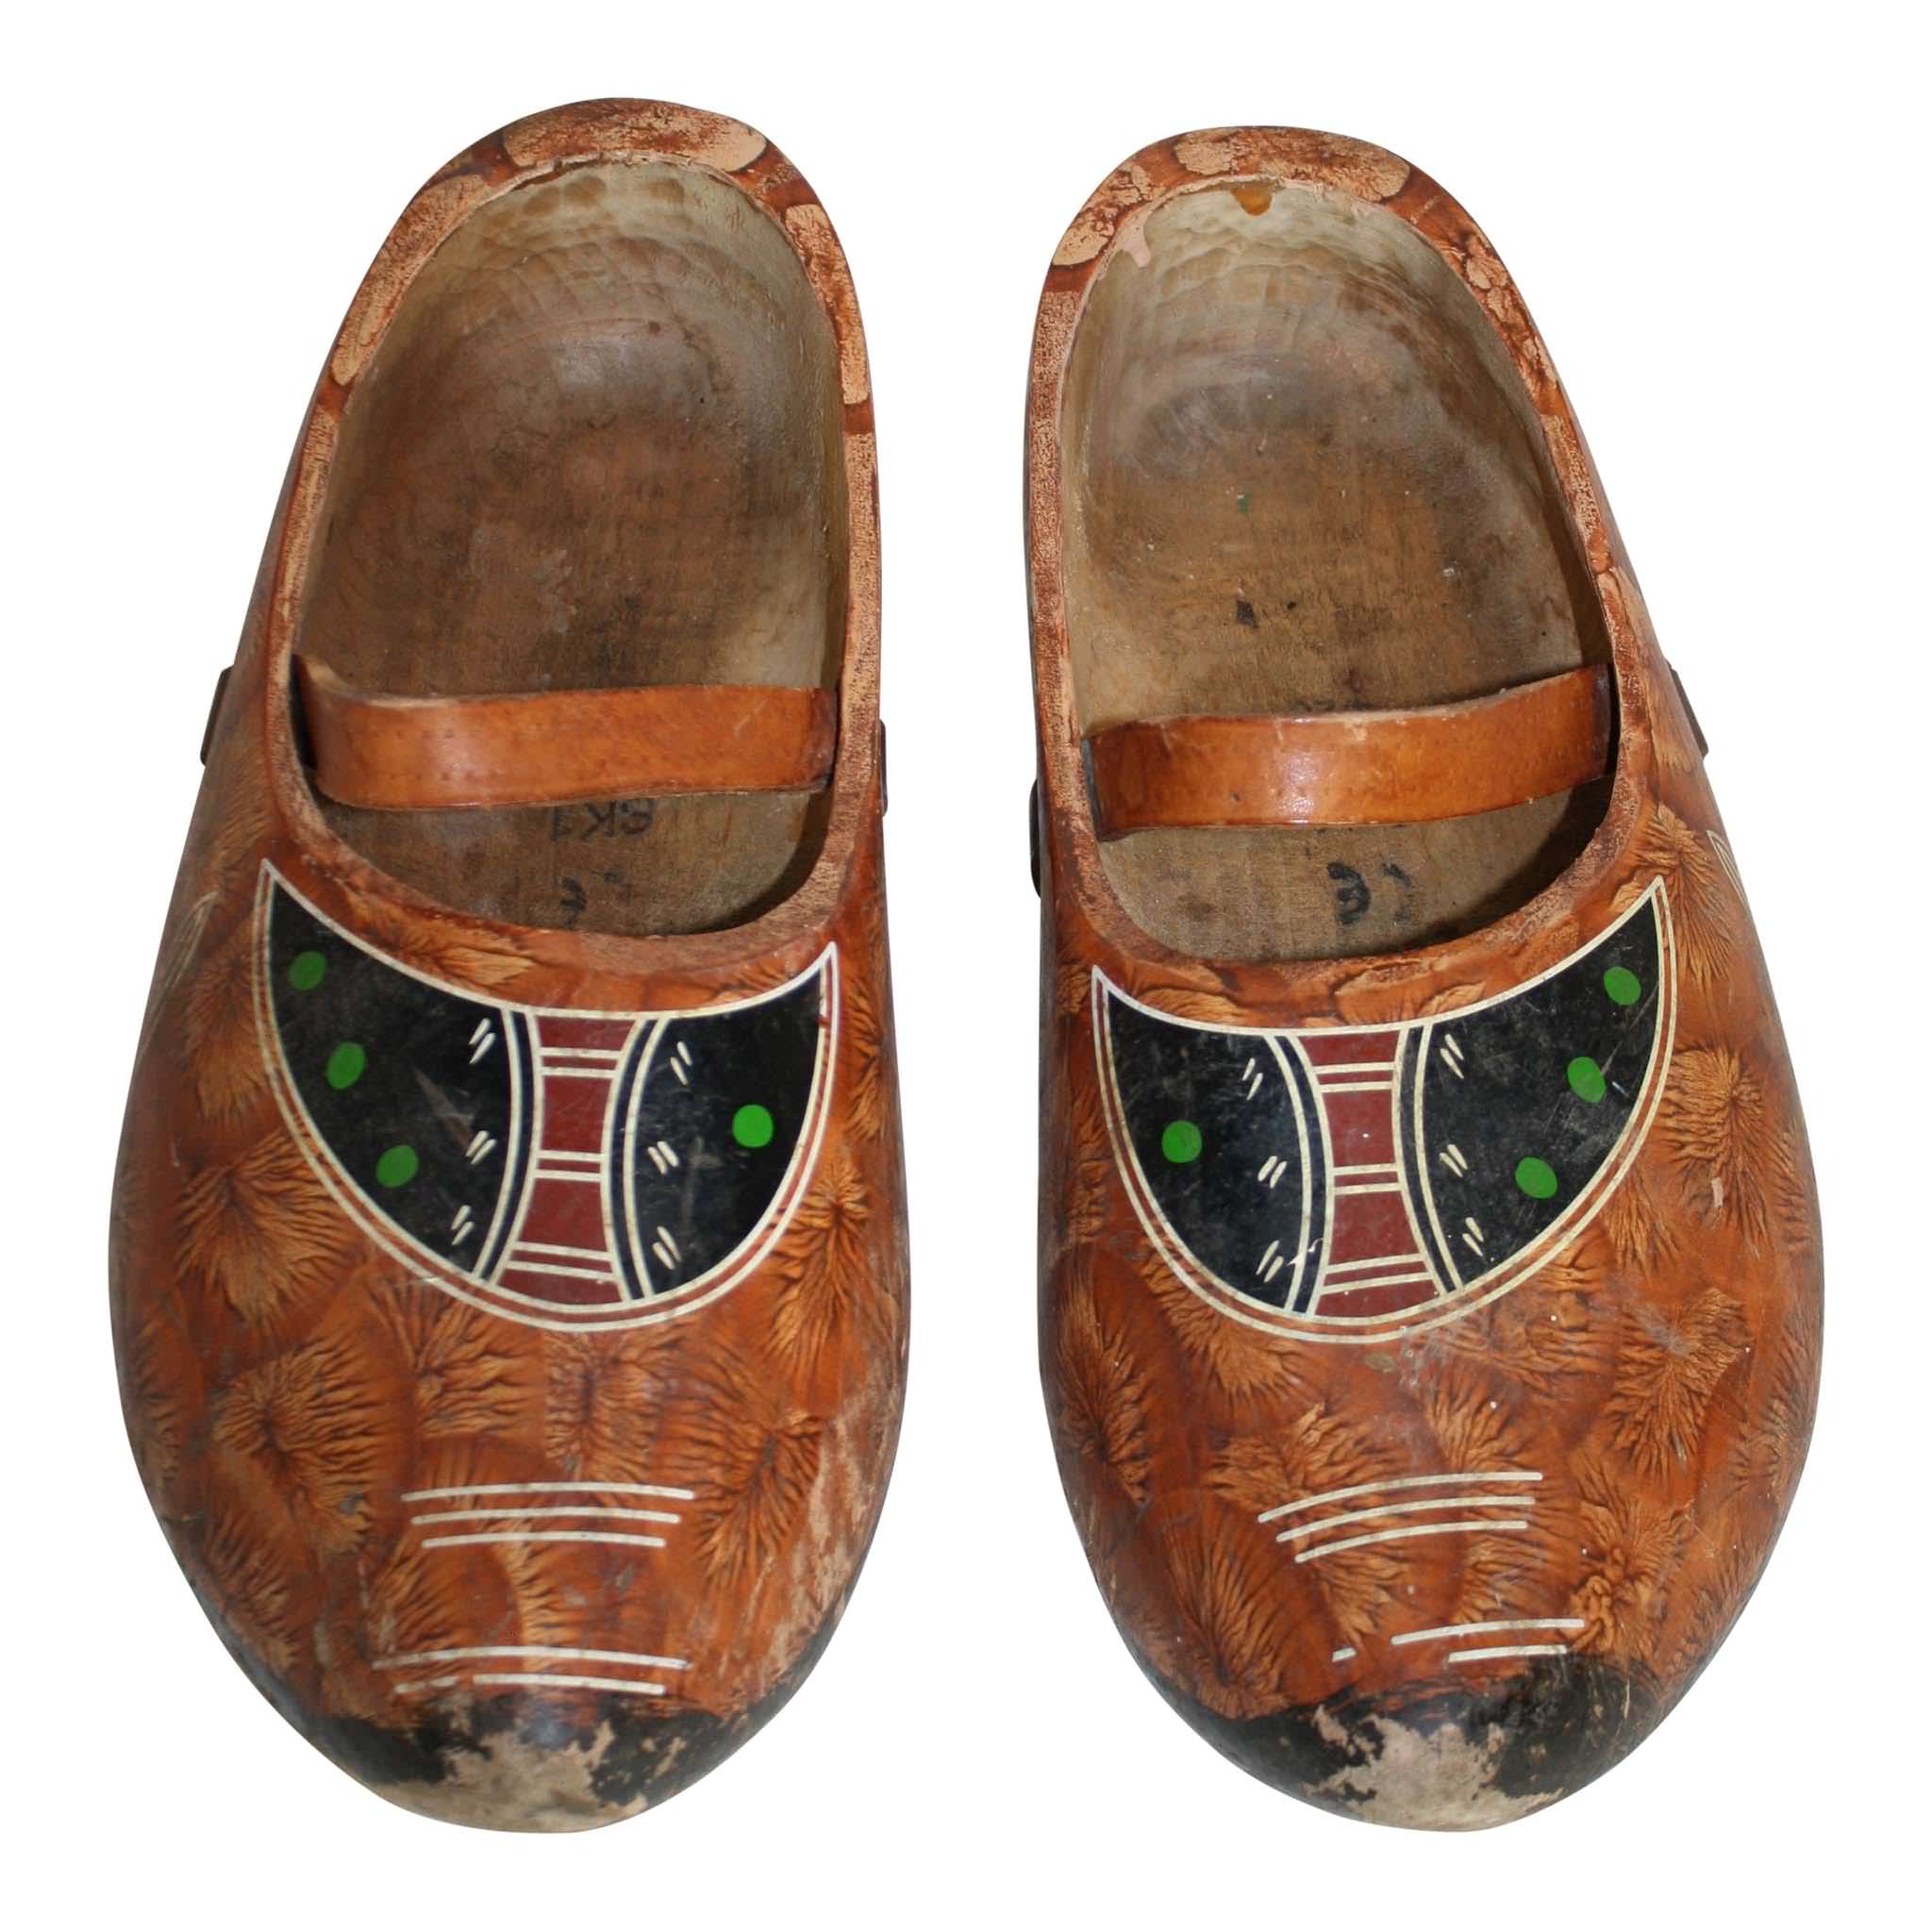 Pair of Painted Wooden Clogs